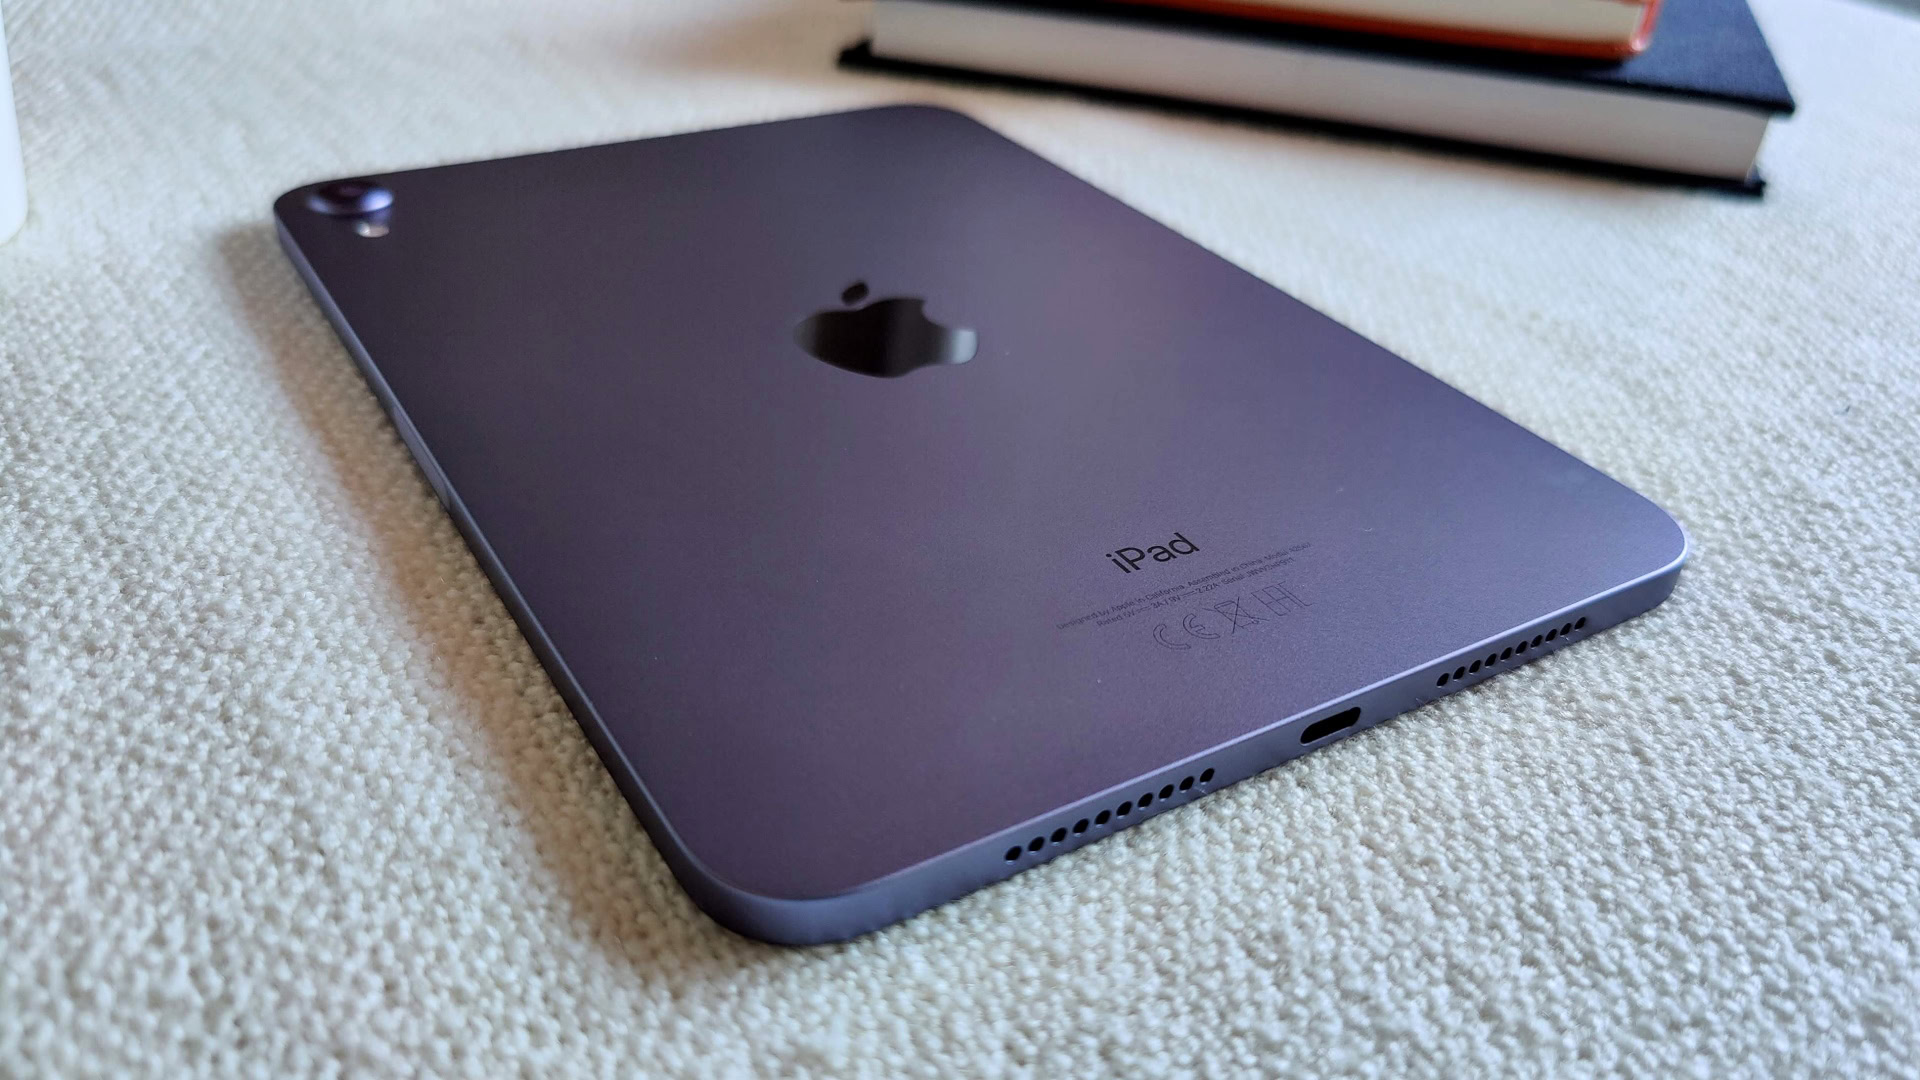 Apple iPad Mini (6th generation) review: This one's just right